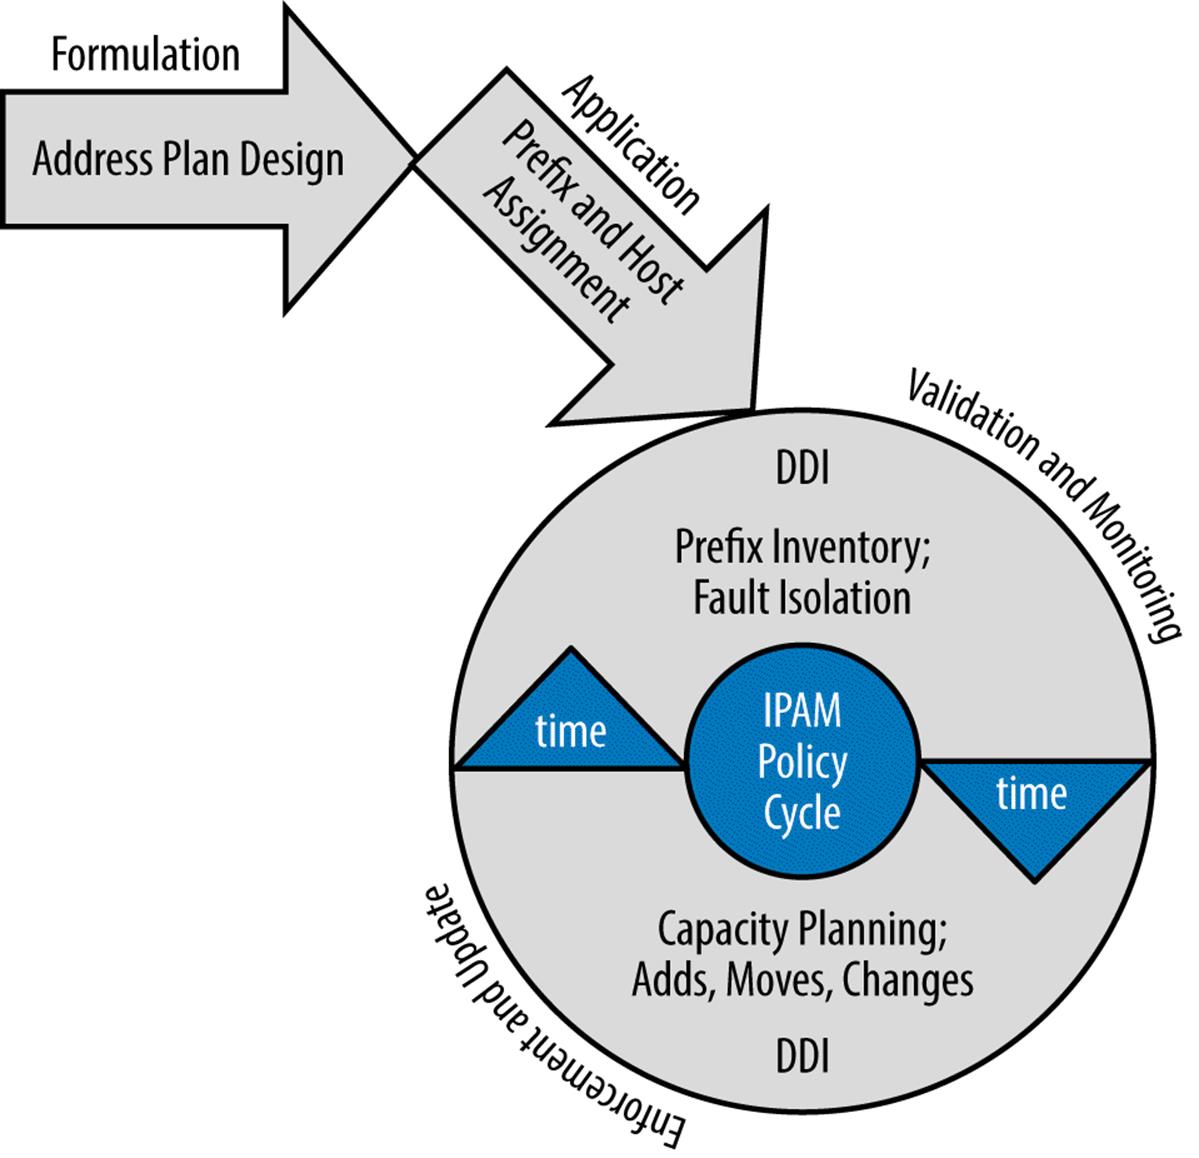 IPAM policy cycle